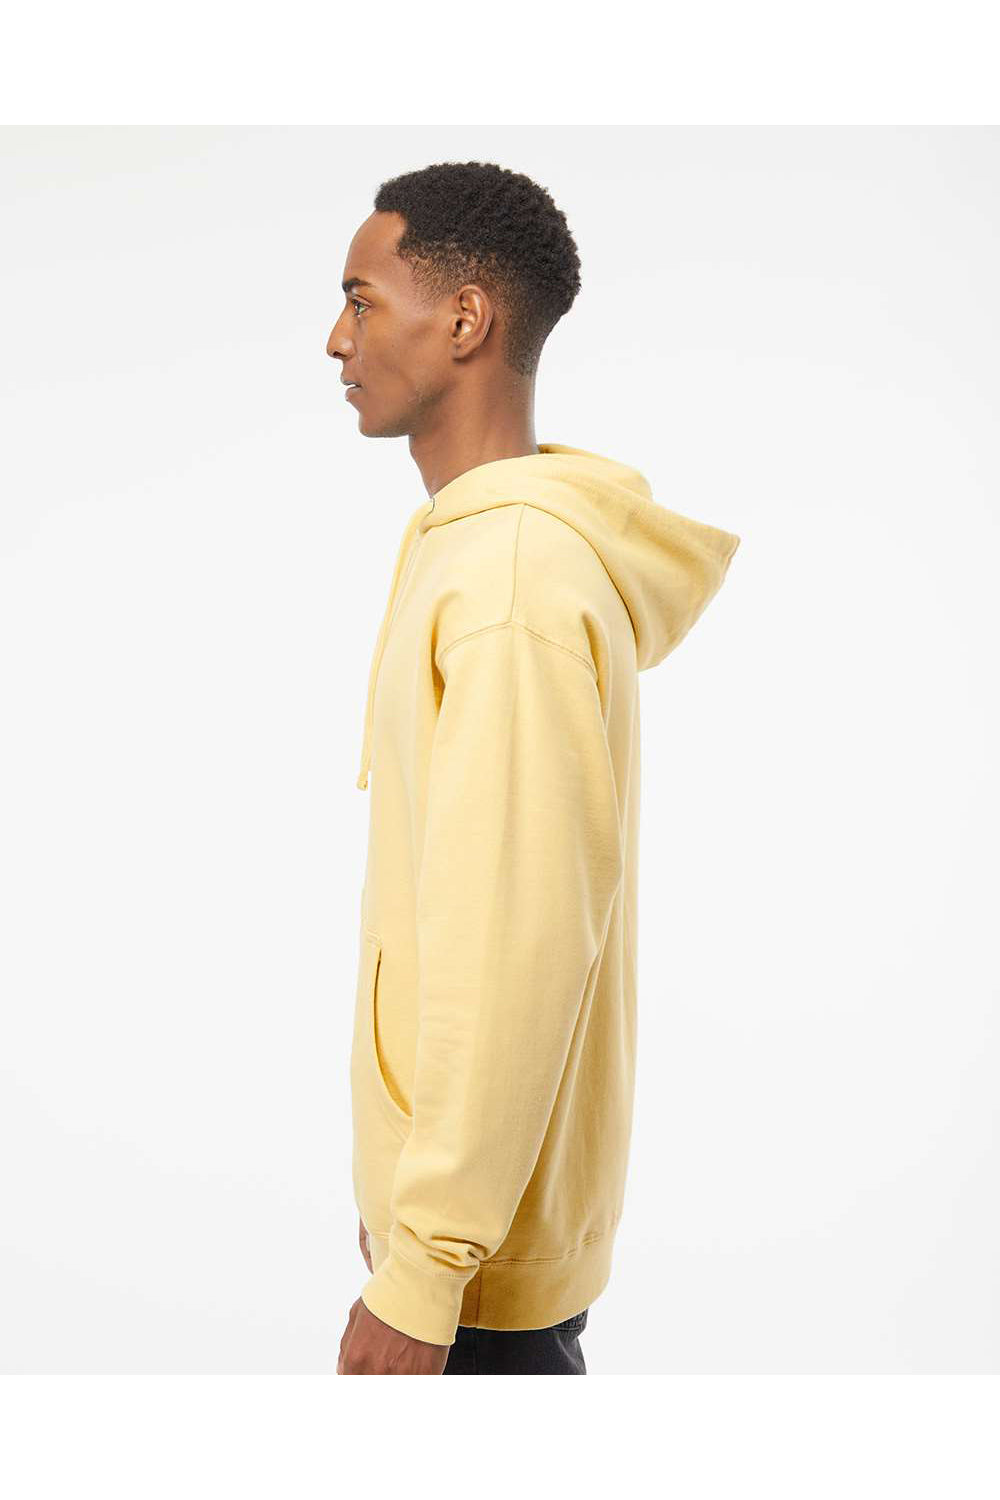 Independent Trading Co. SS4500 Mens Hooded Sweatshirt Hoodie Light Yellow Model Side